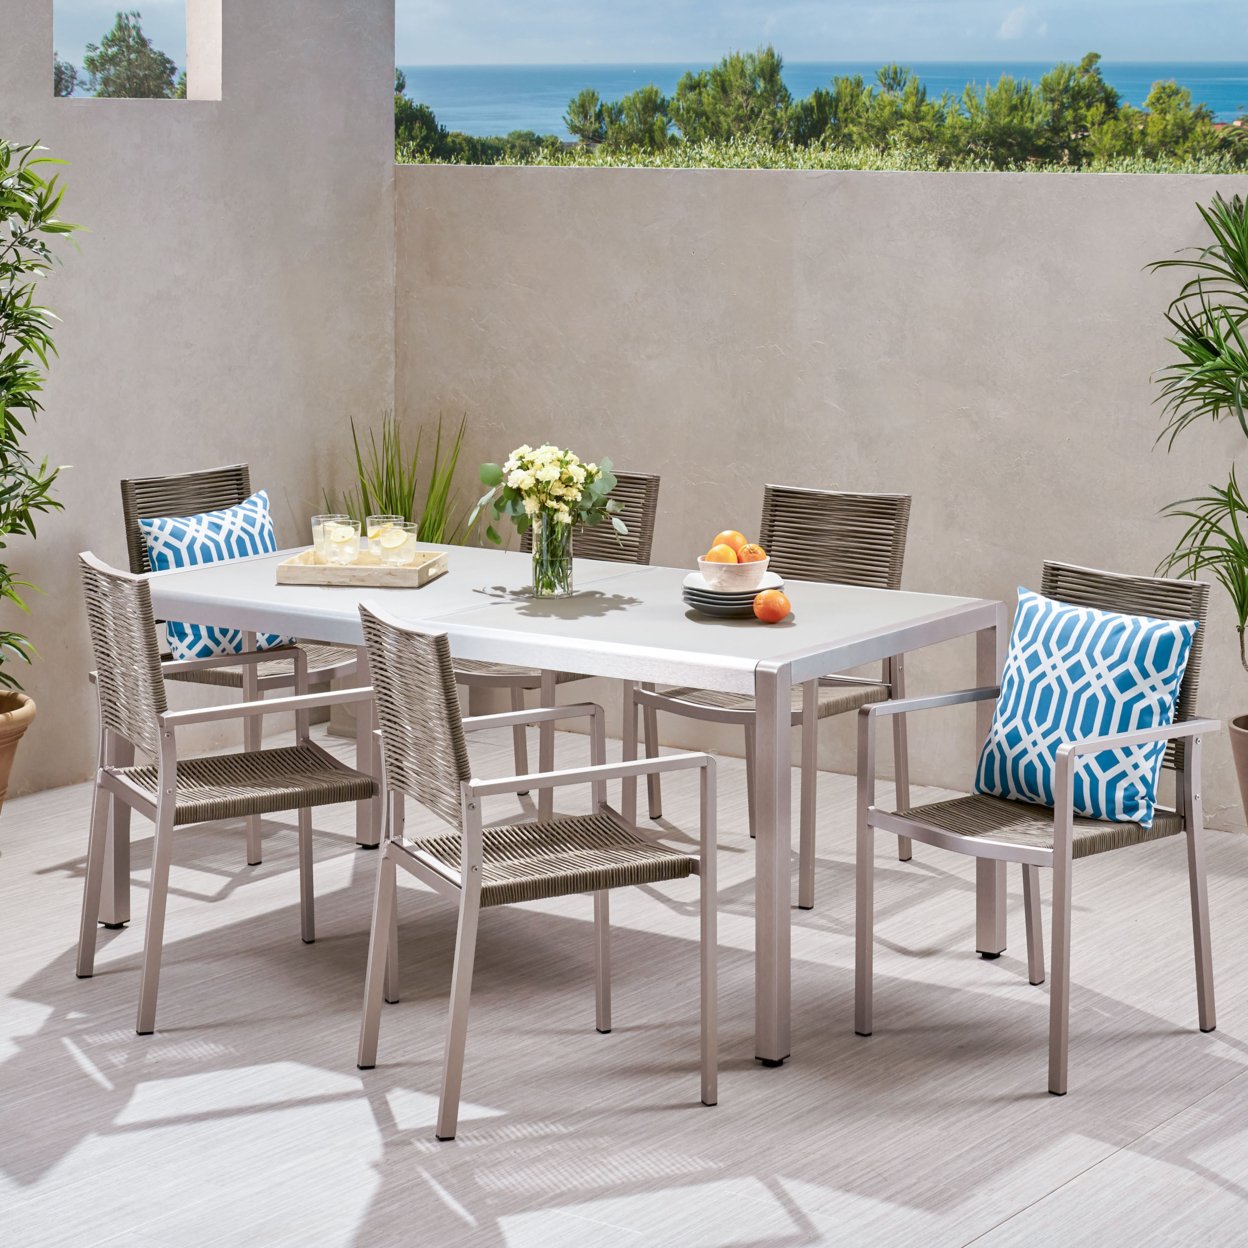 Sandy Outdoor Modern 6 Seater Aluminum Dining Set With Tempered Glass Table Top - Gray + Silver + Dark Gray